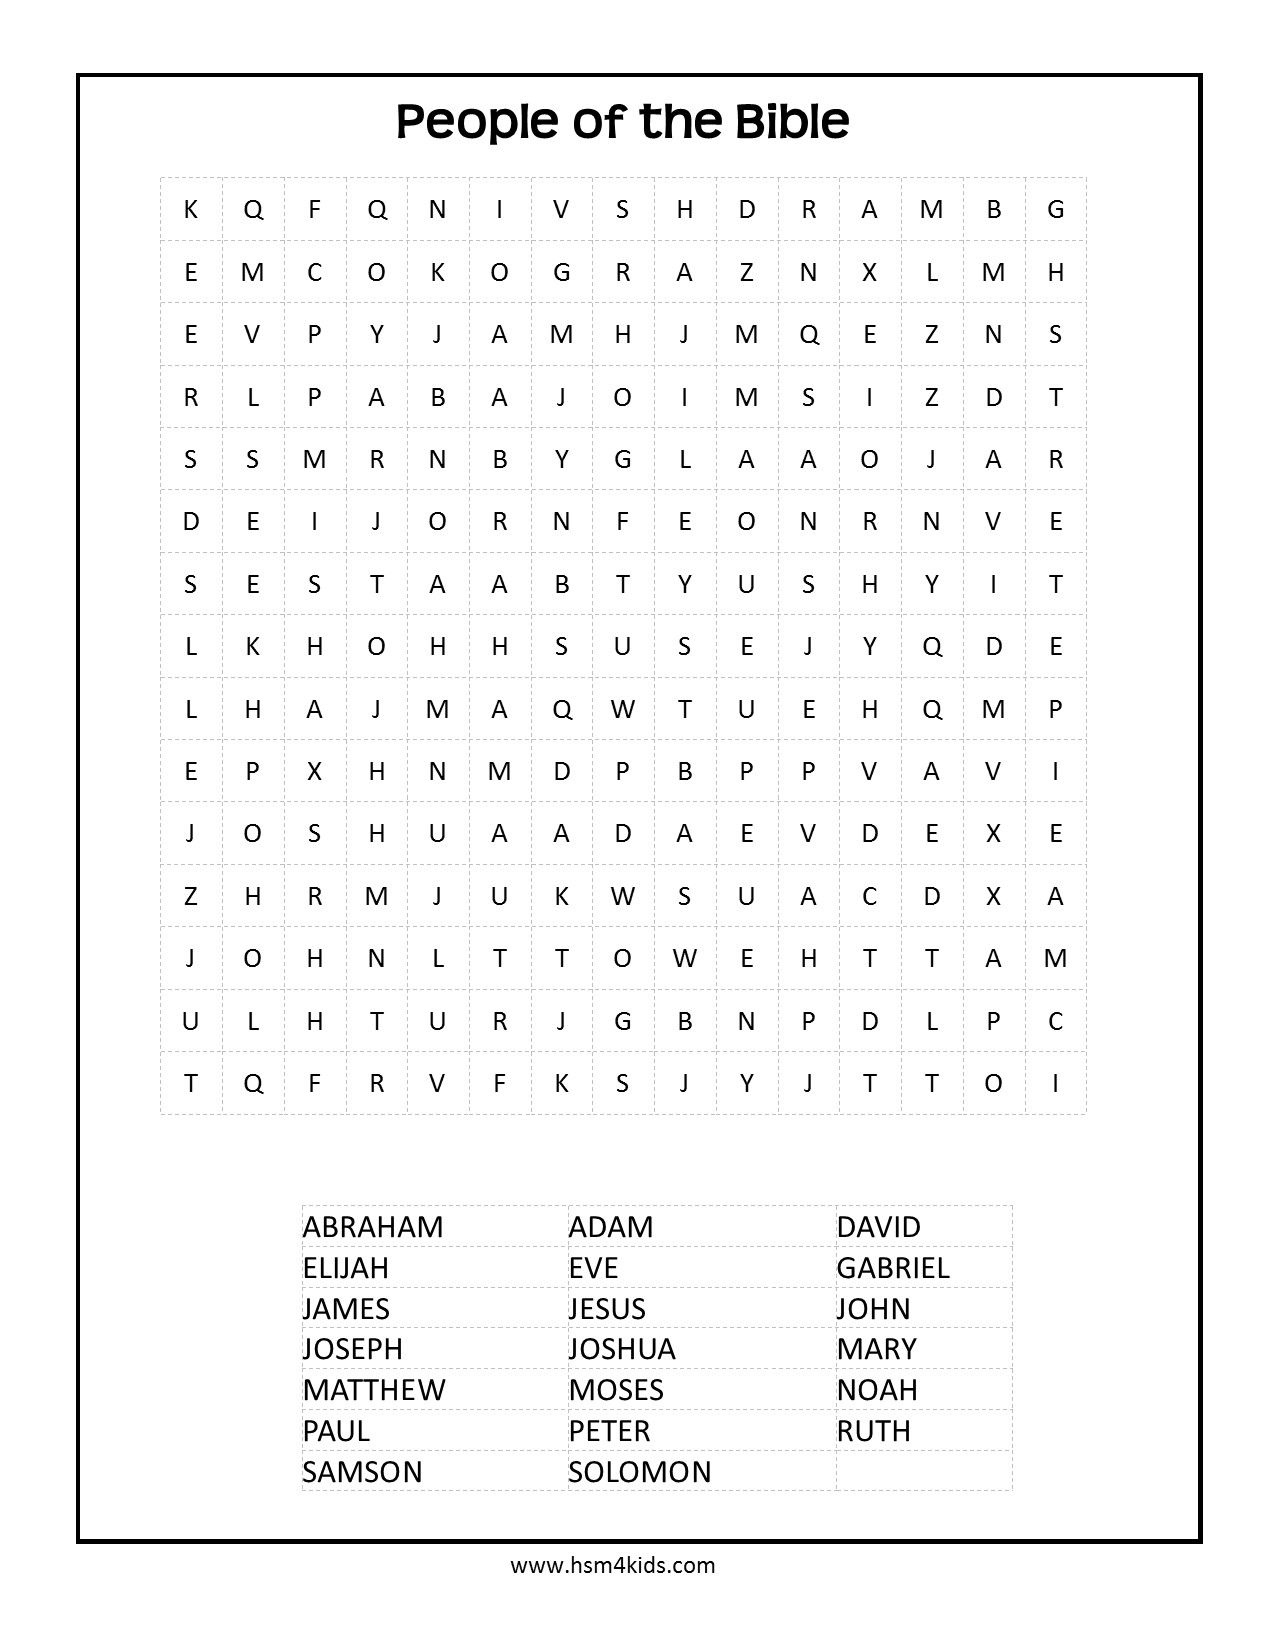 Psalm 107 Song Of Thanksgiving Bible Word Search Puzzles If Word 